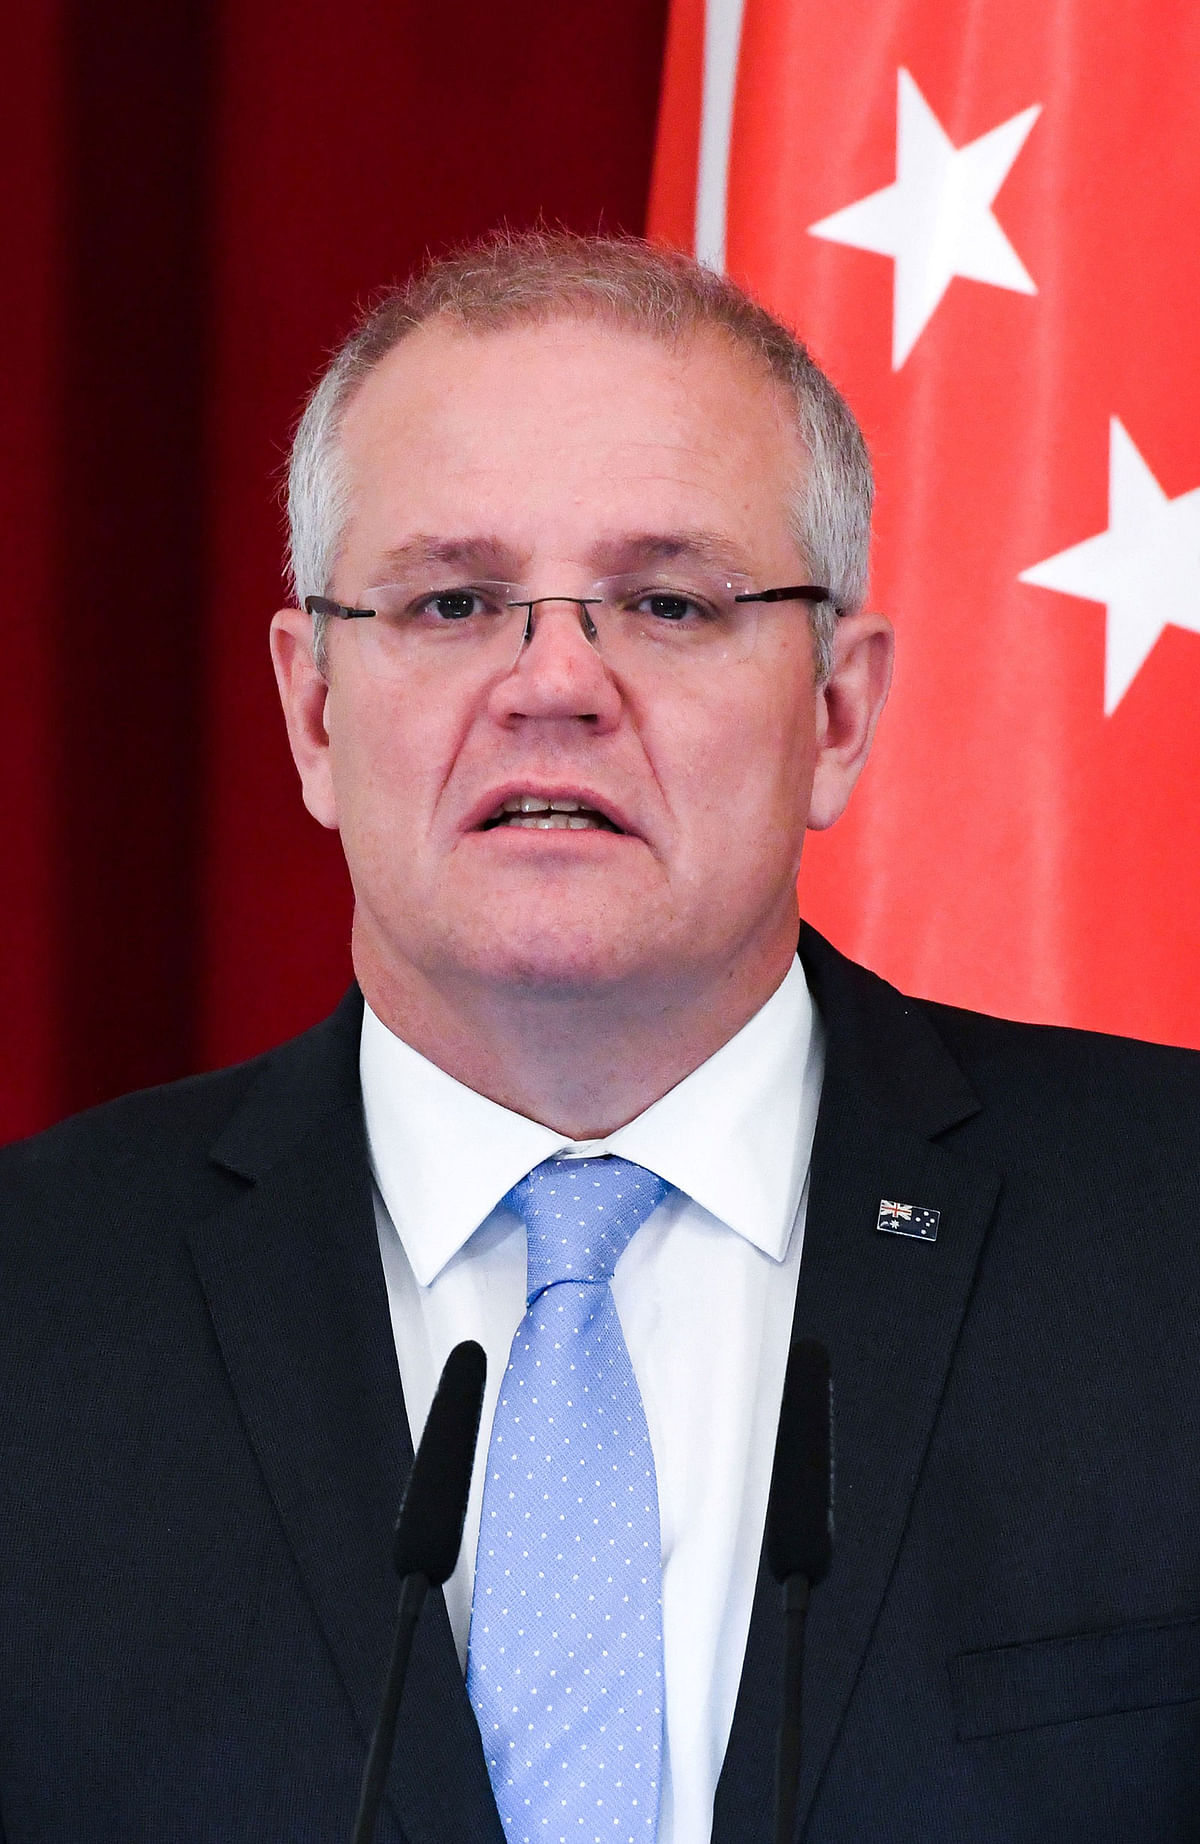 Australia’s prime minister Scott Morrison speaks at a joint press conference with Singapore`s Prime Minister Lee Hsien Loong (not pictured) at the Istana Presidential Palace in Singapore on 7 June. Photo: AFP